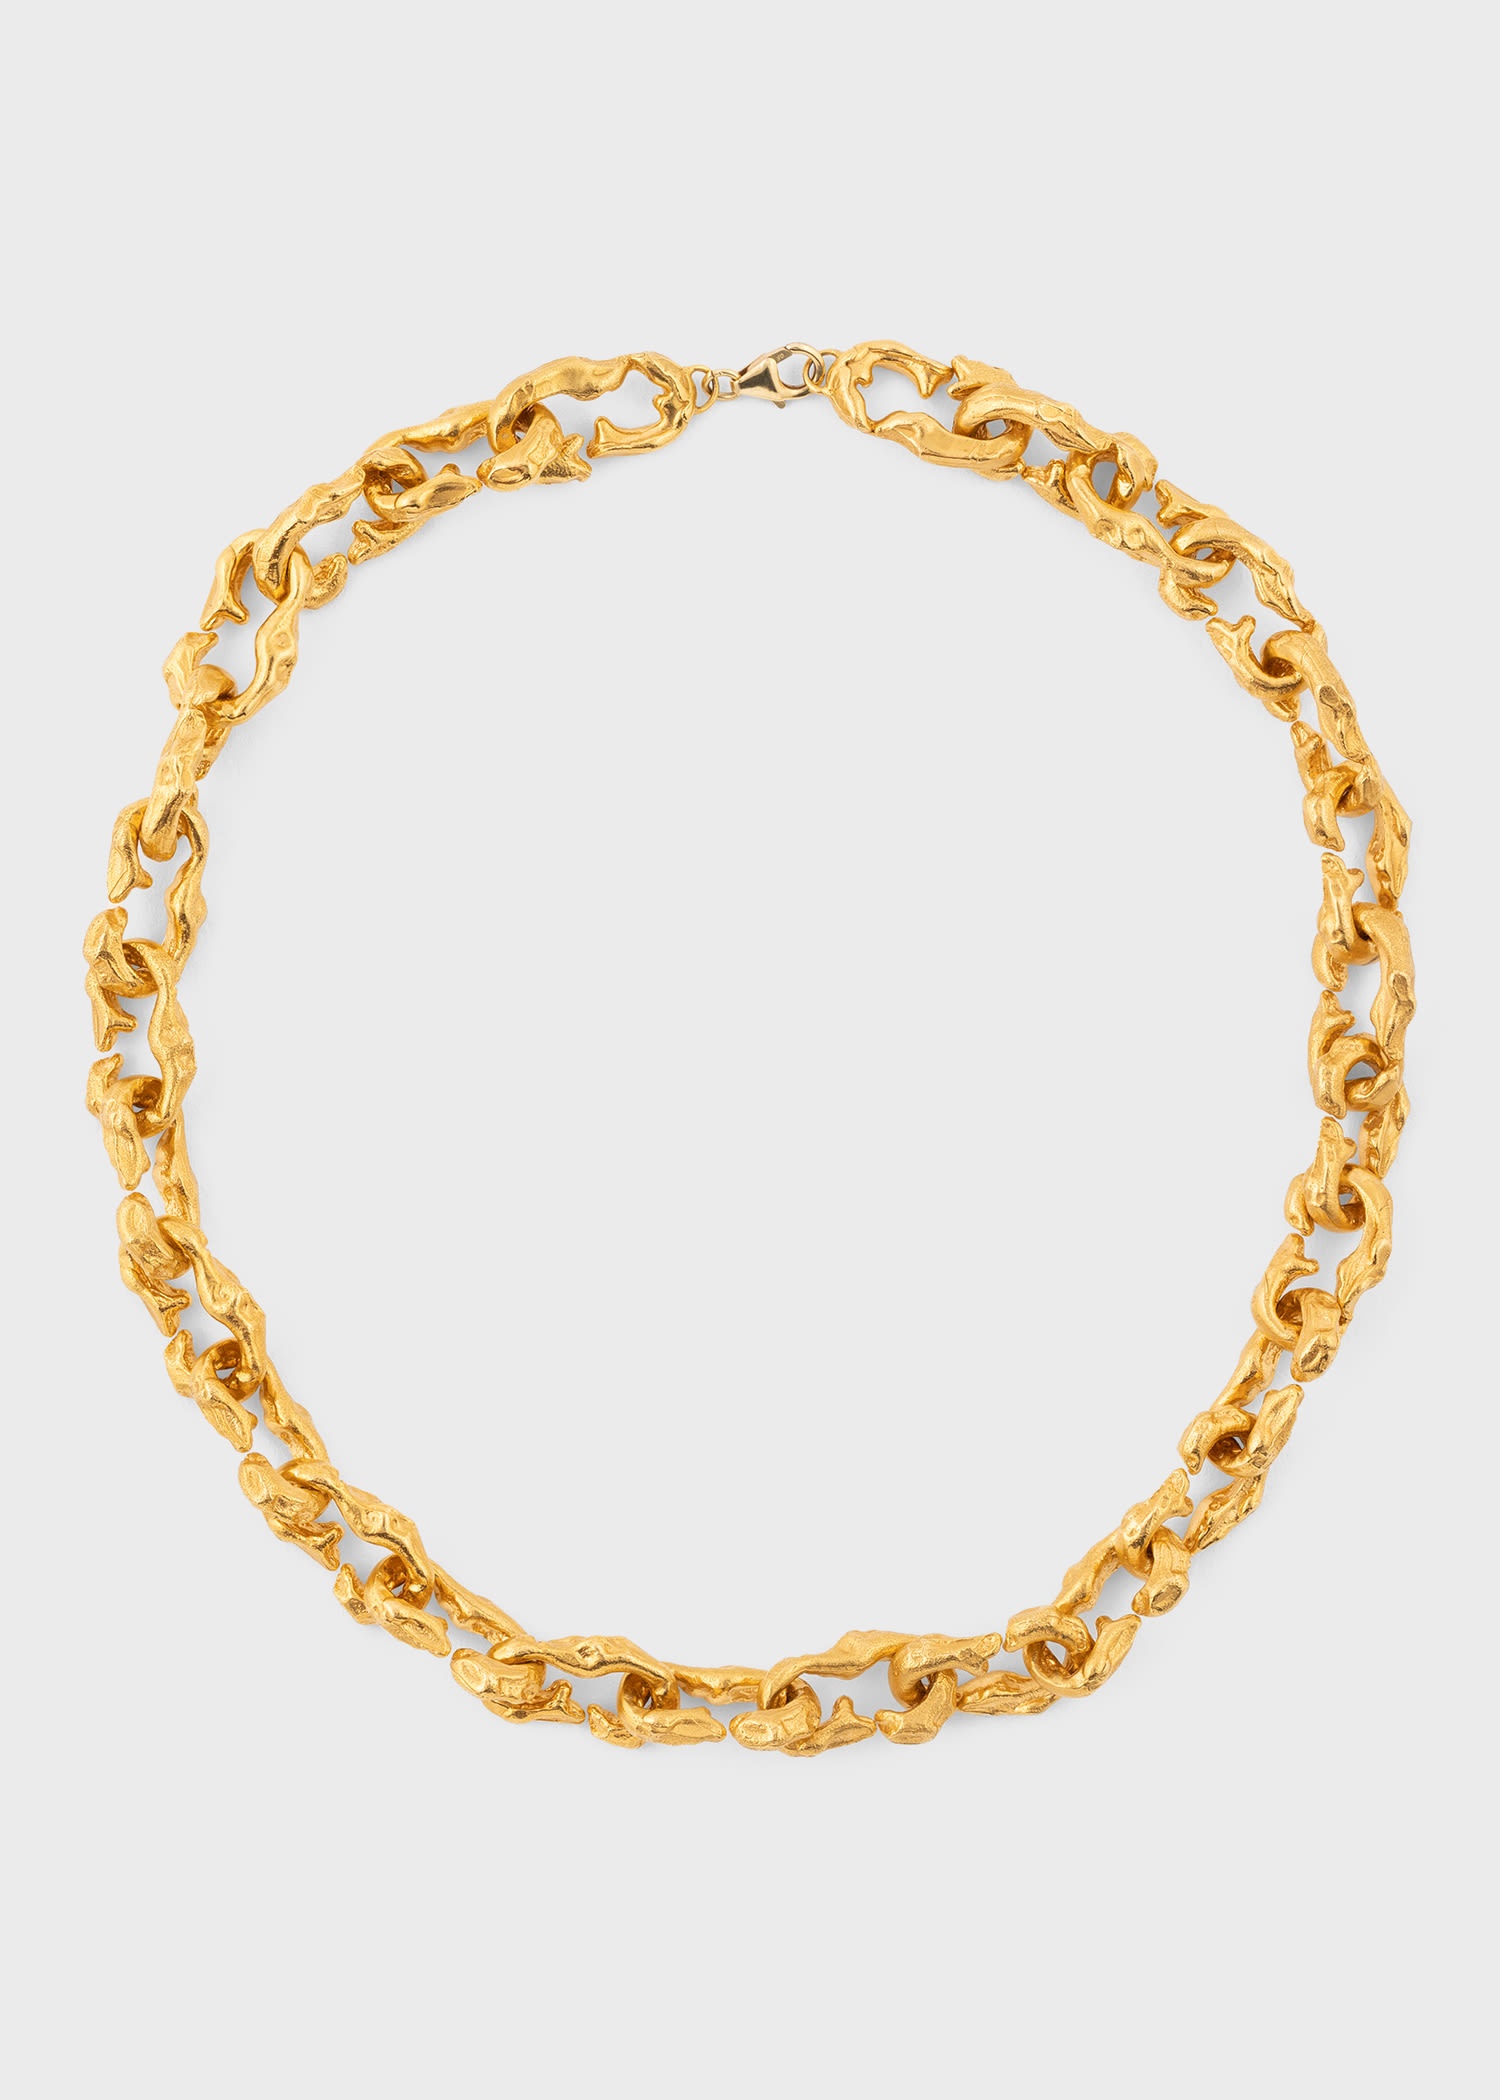 'The Selva Oscura' Choker Necklace by Alighieri - 2